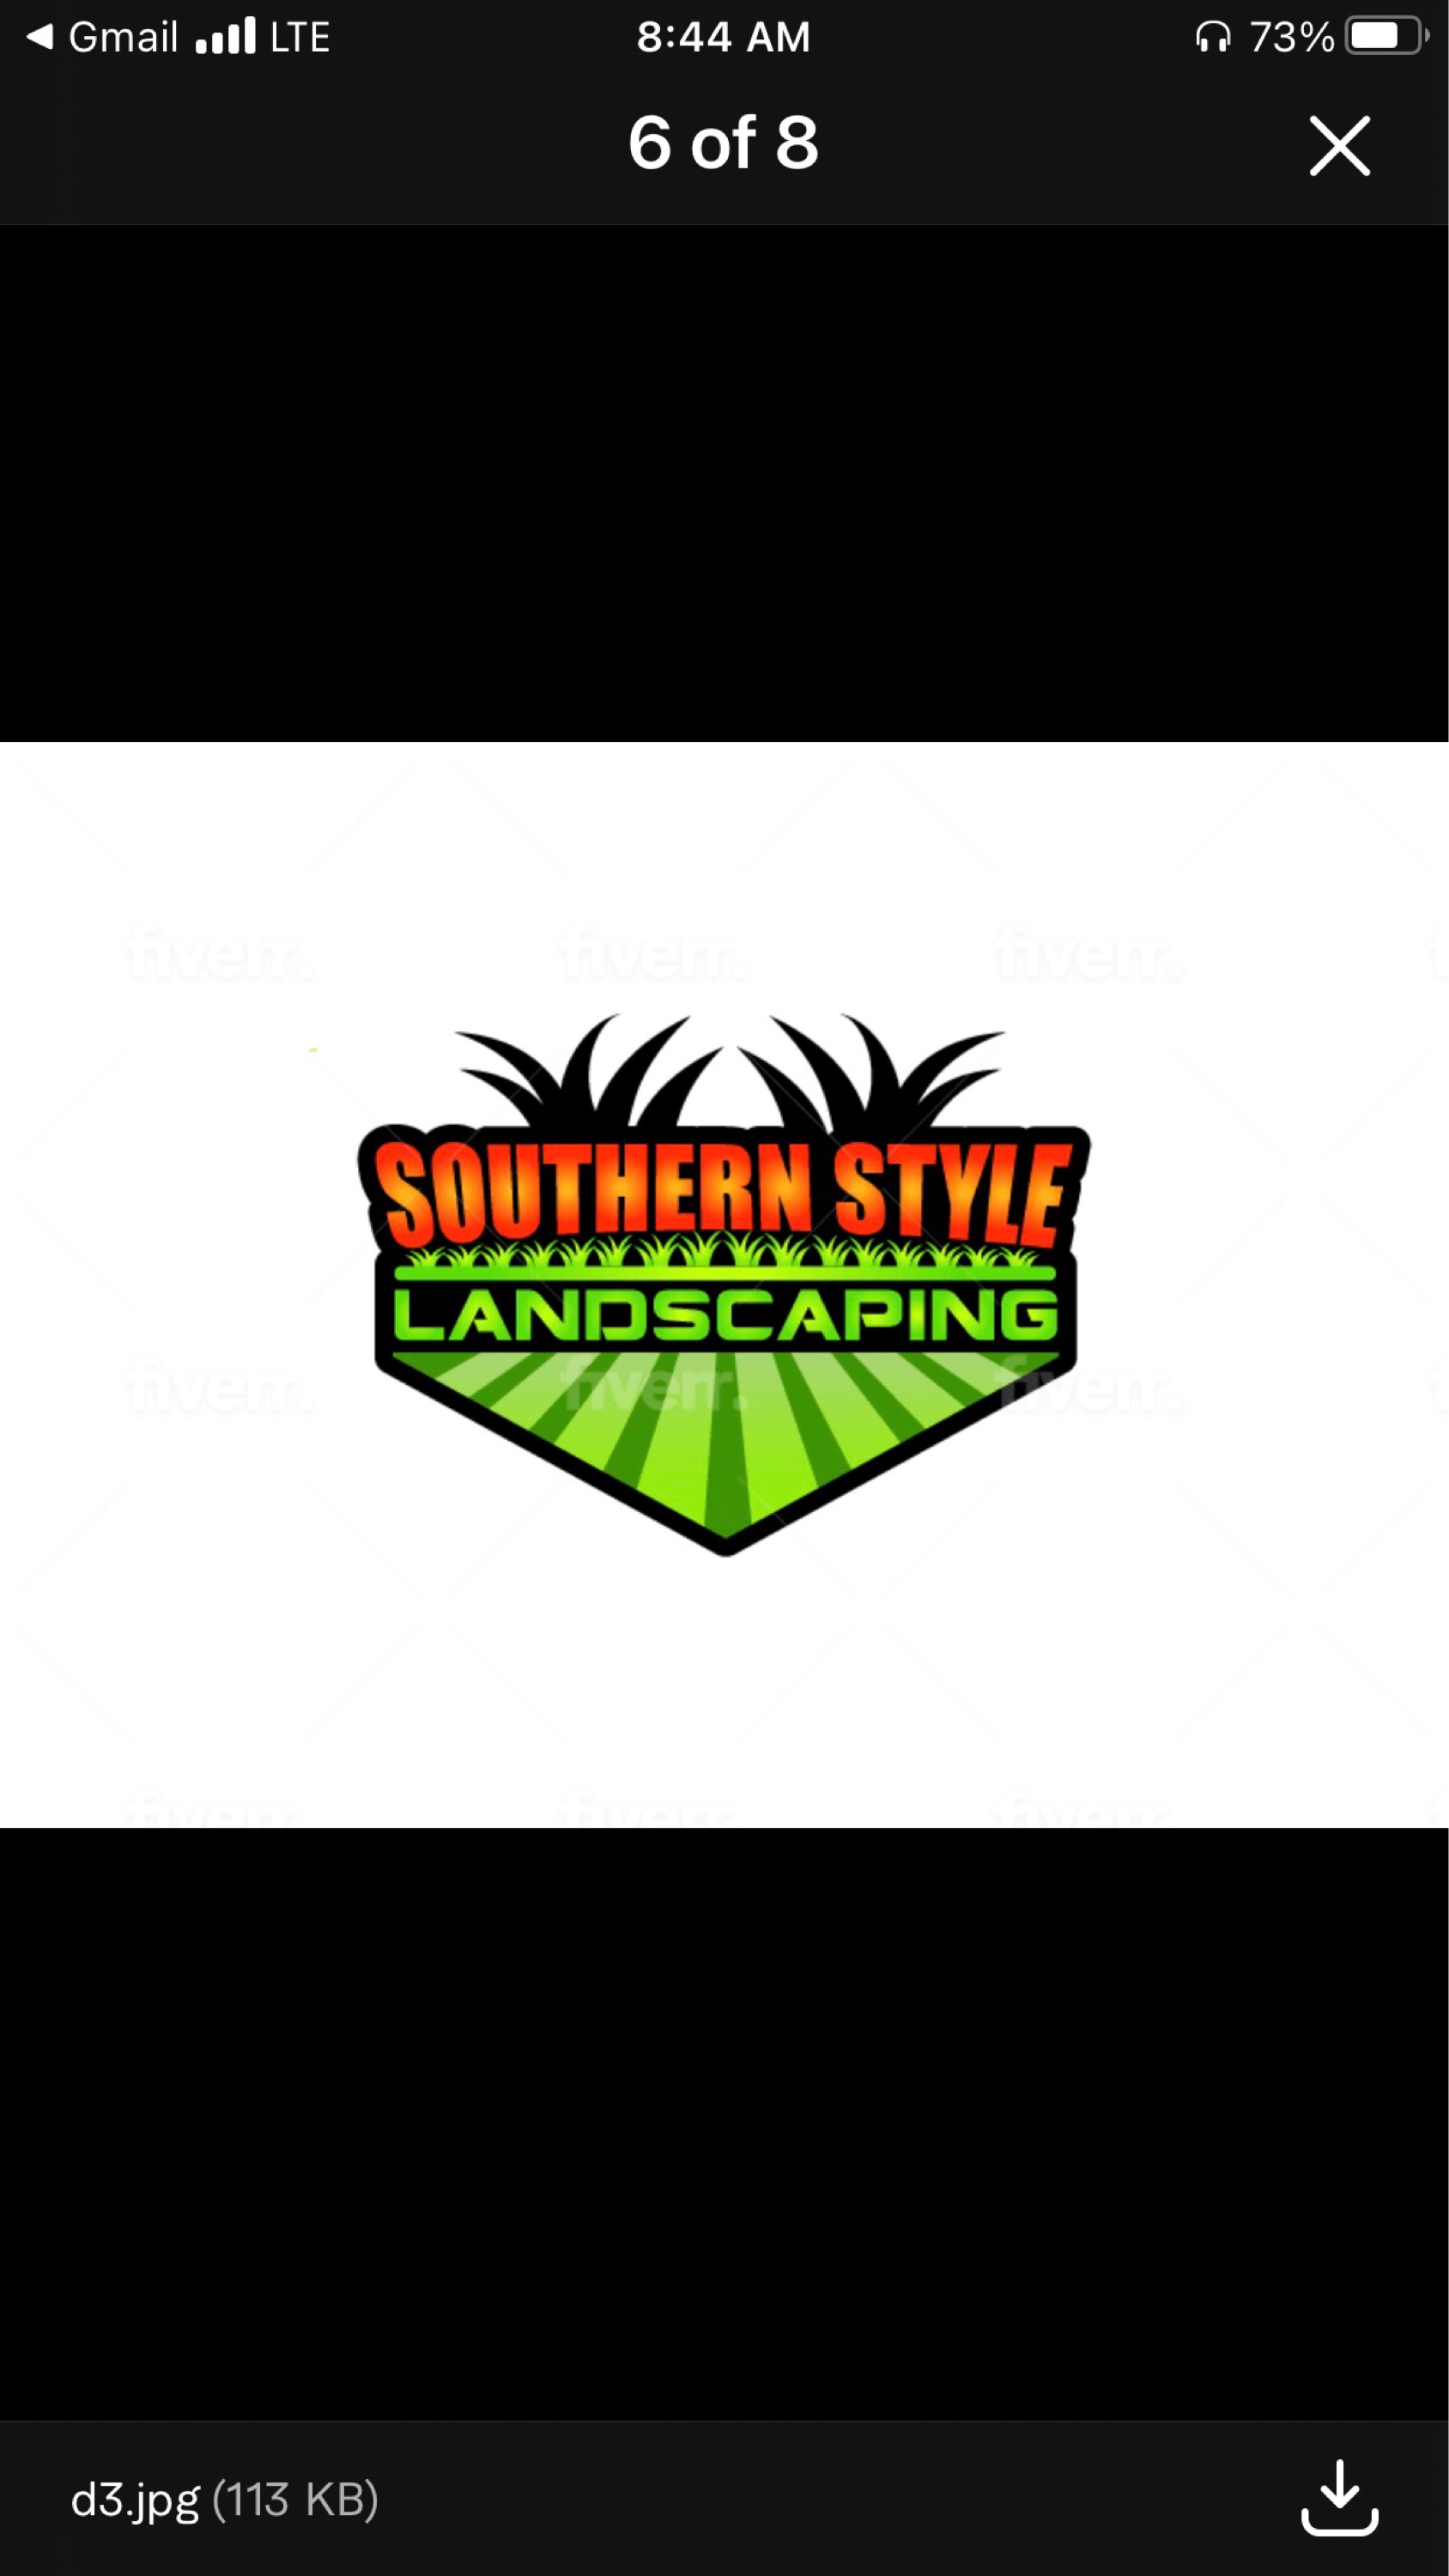 Southern Style Landscaping and Lawn Care Logo